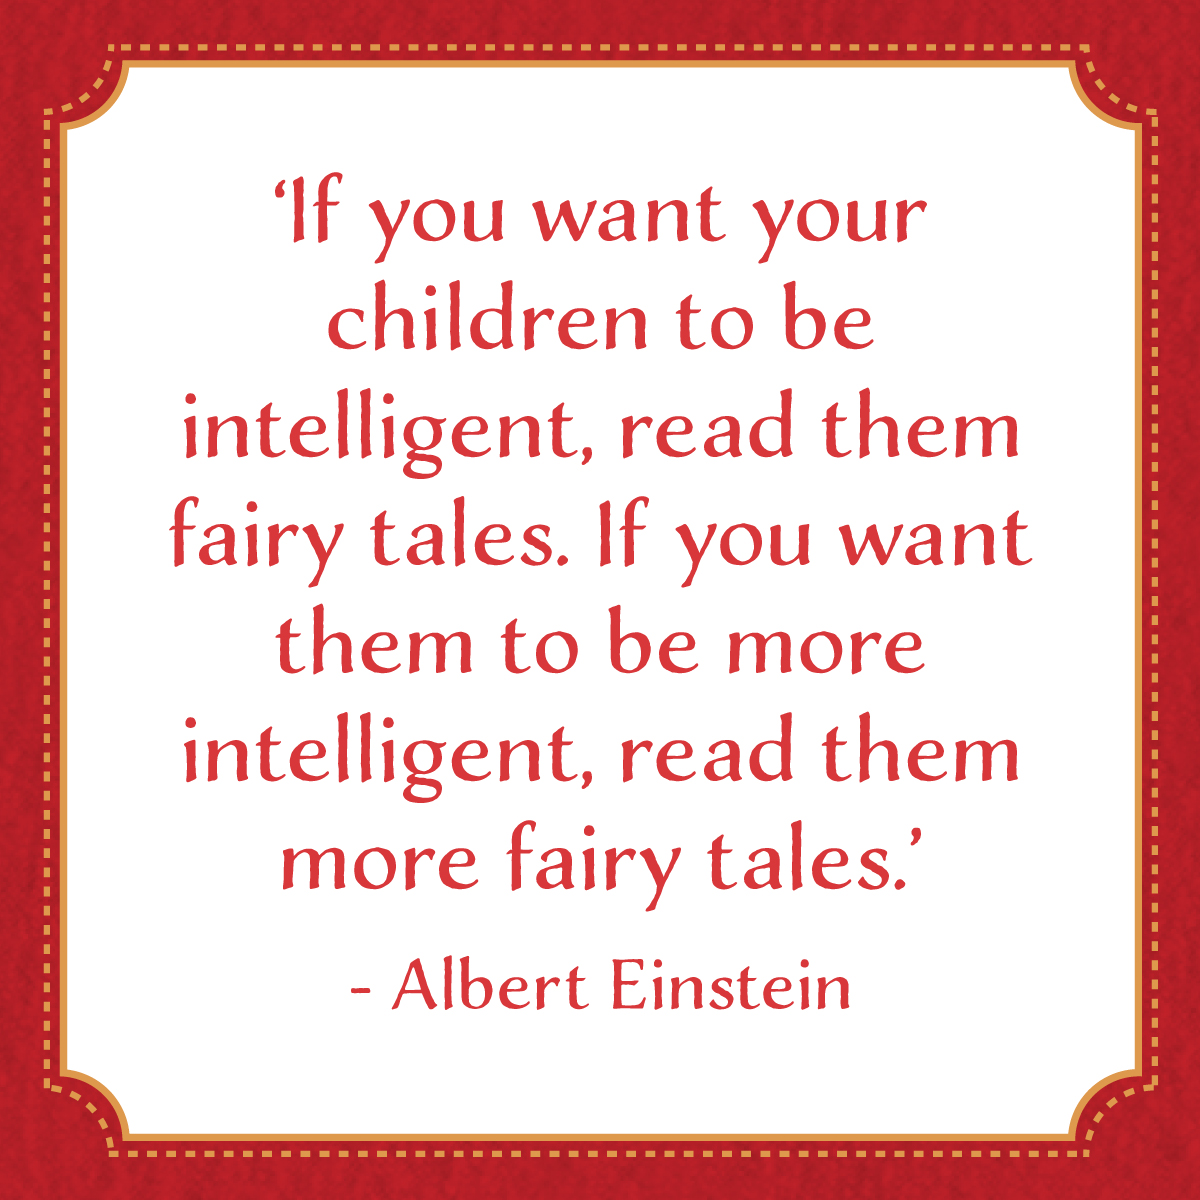 If you want your children to be intelligent, read them fairy tales. If you want them to be more intelligent, read them more fairy tales. -- Albert Einstein